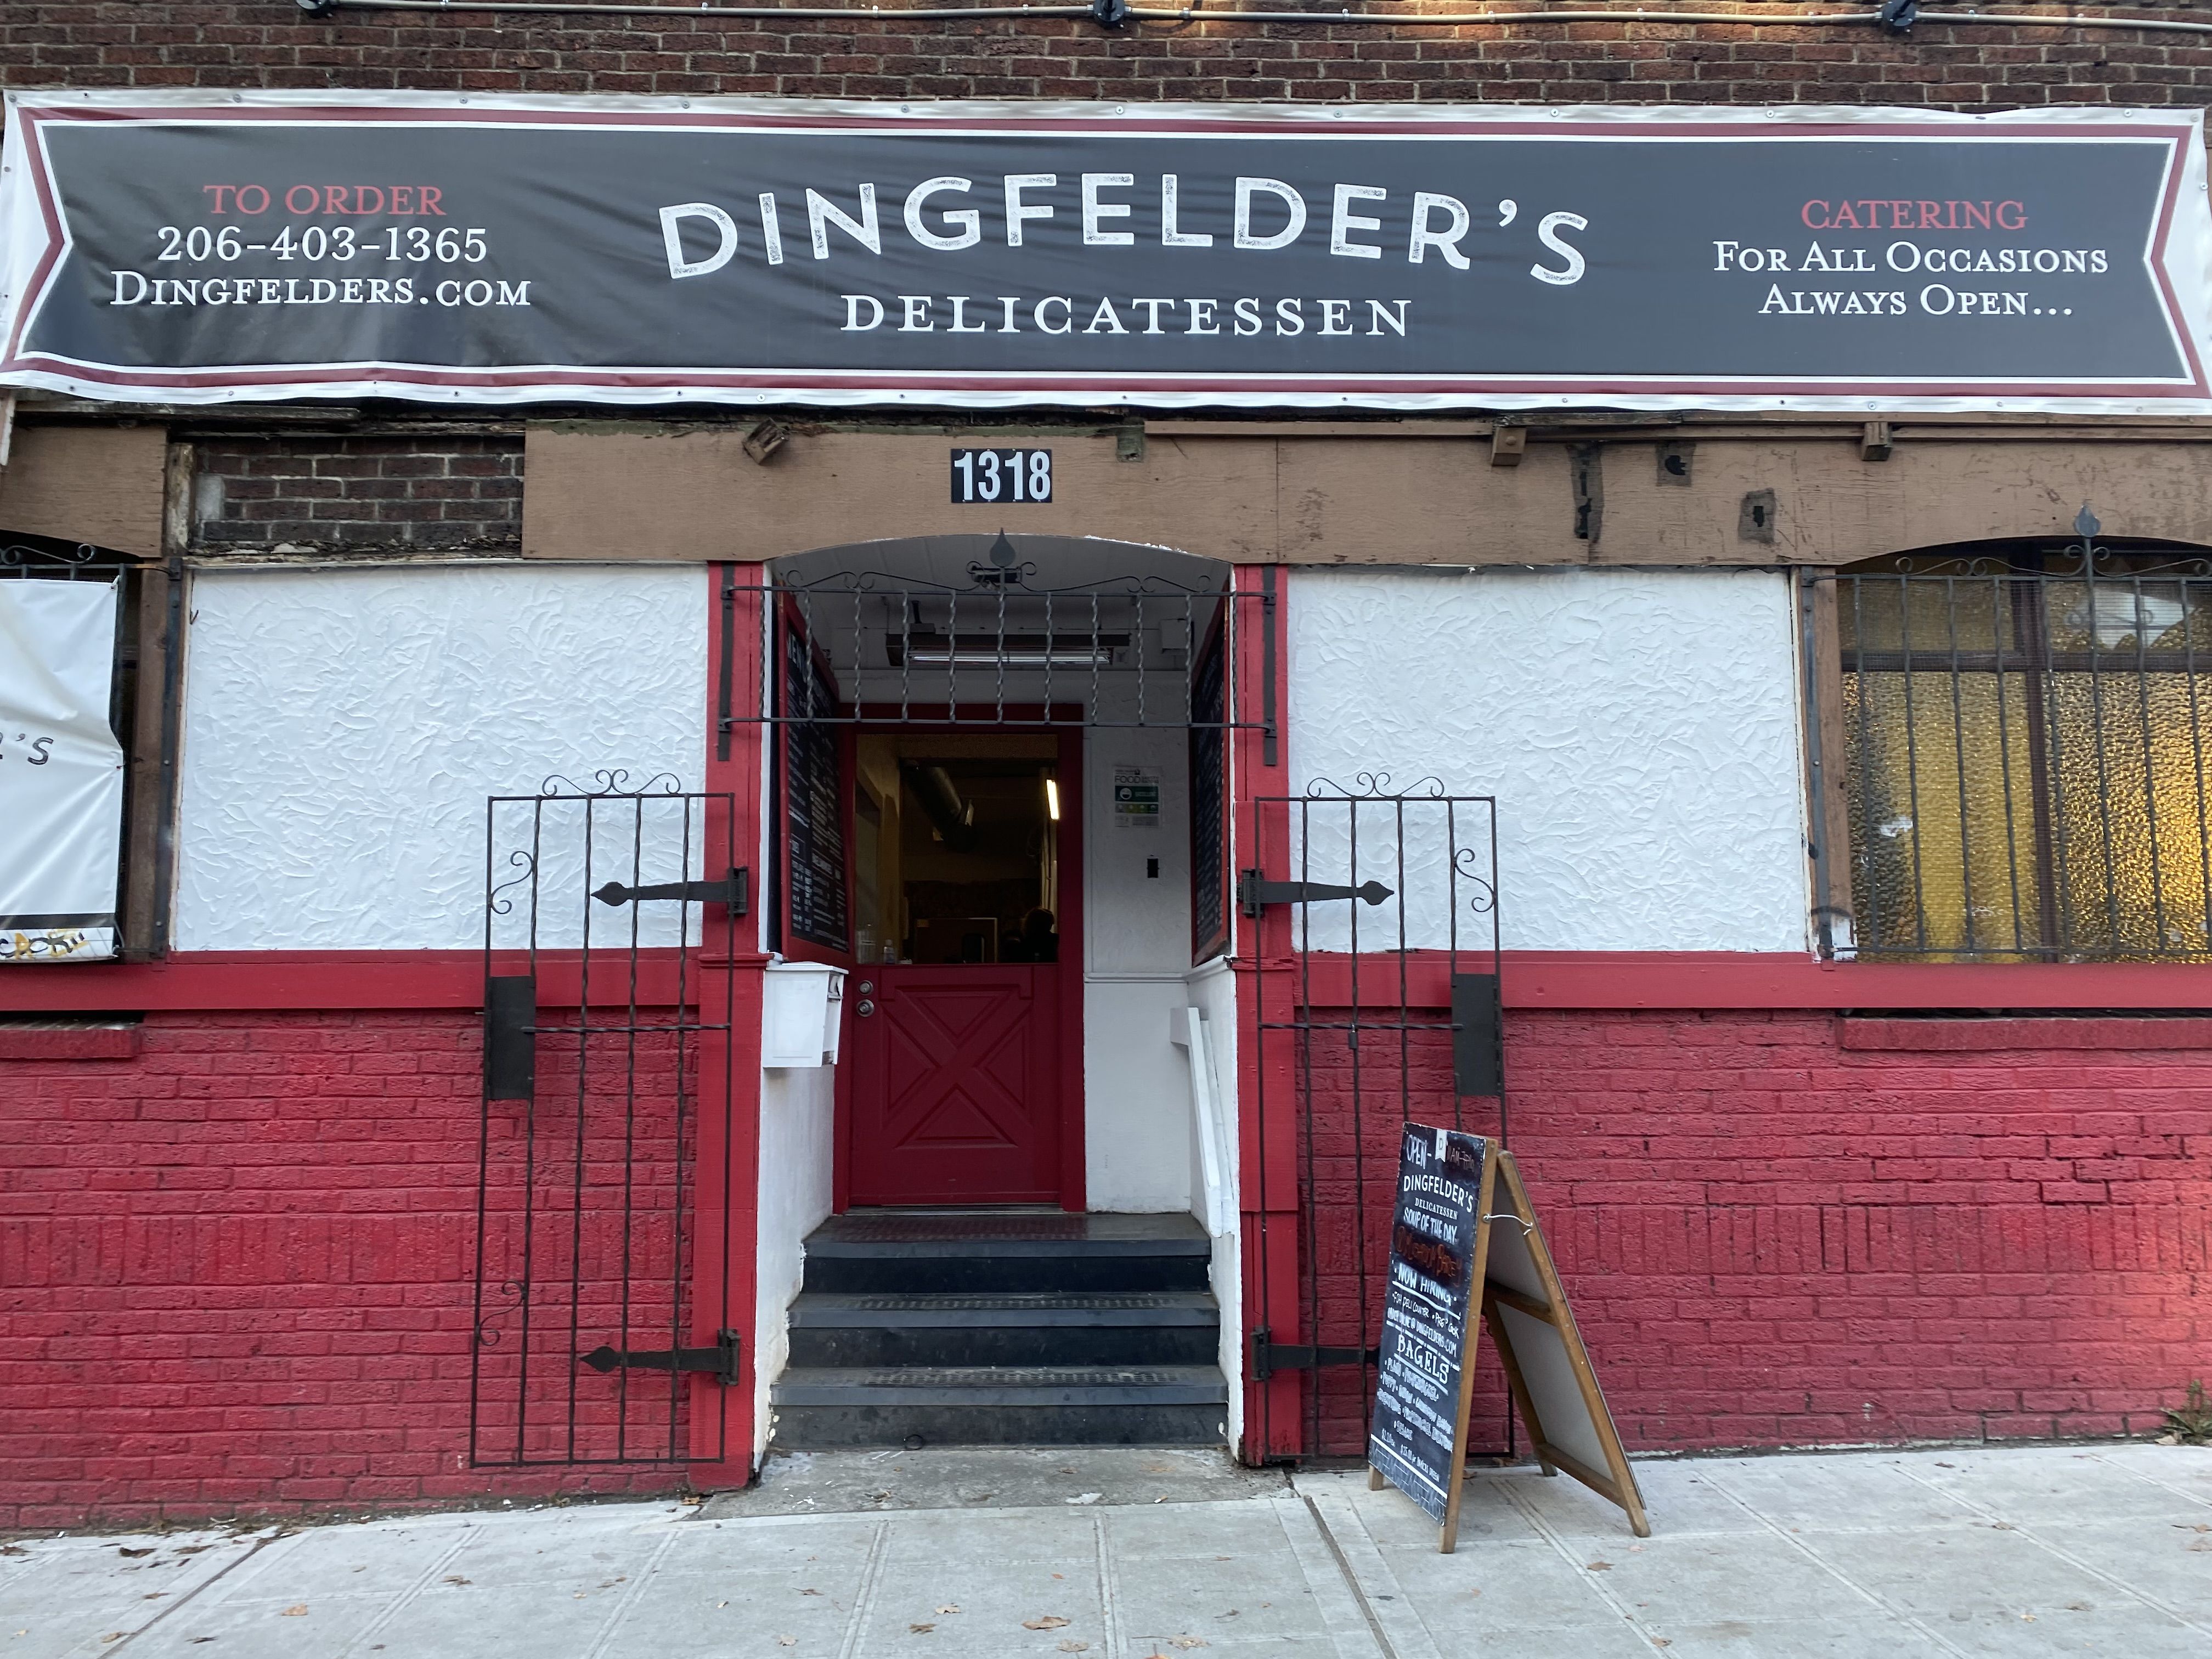 A view of a storefront with a sign that says "Dingfelder's" overhead, and a sandwich board on the sidewalk.